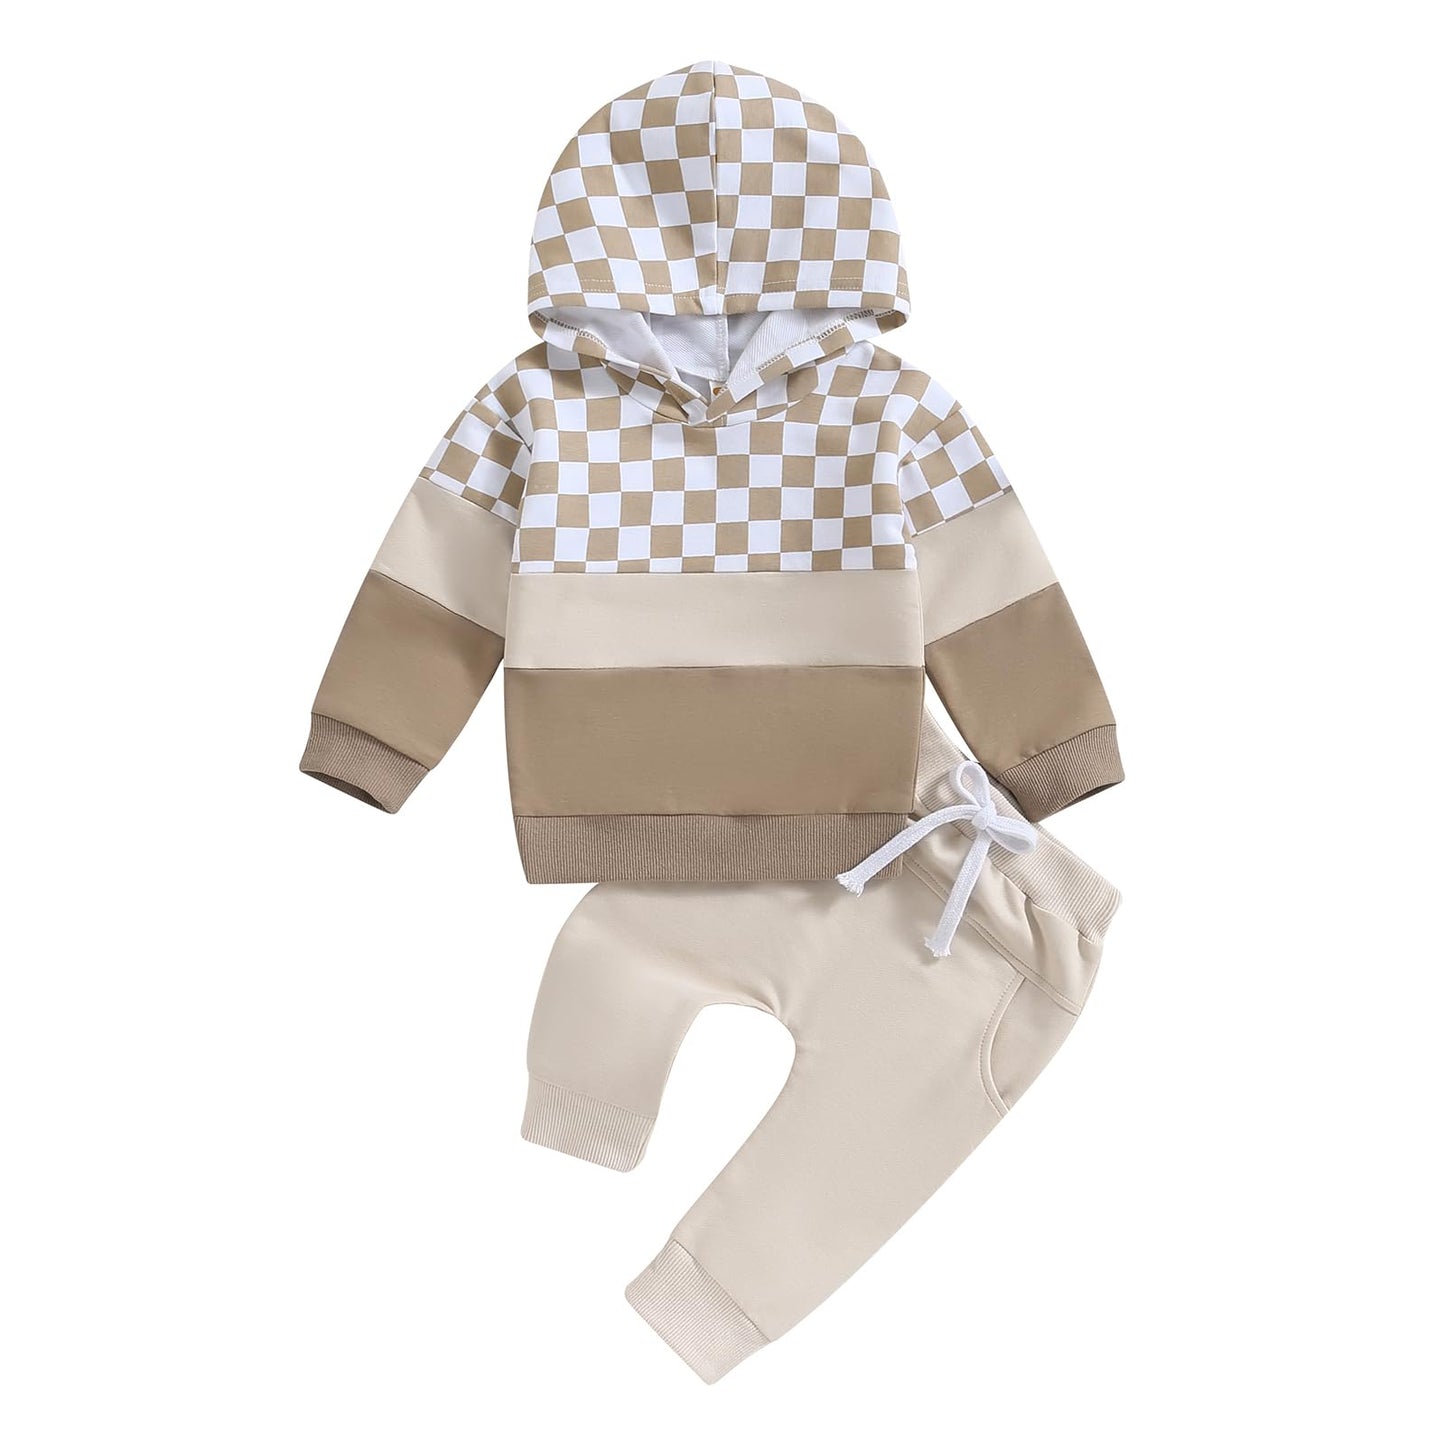 Foidiccx Newborn Toddler Baby Boy Clothes Checkerboard Color Block Hoodie Outfits Sweatsuit Fall Winter Clothing Sets (0-6 Months)